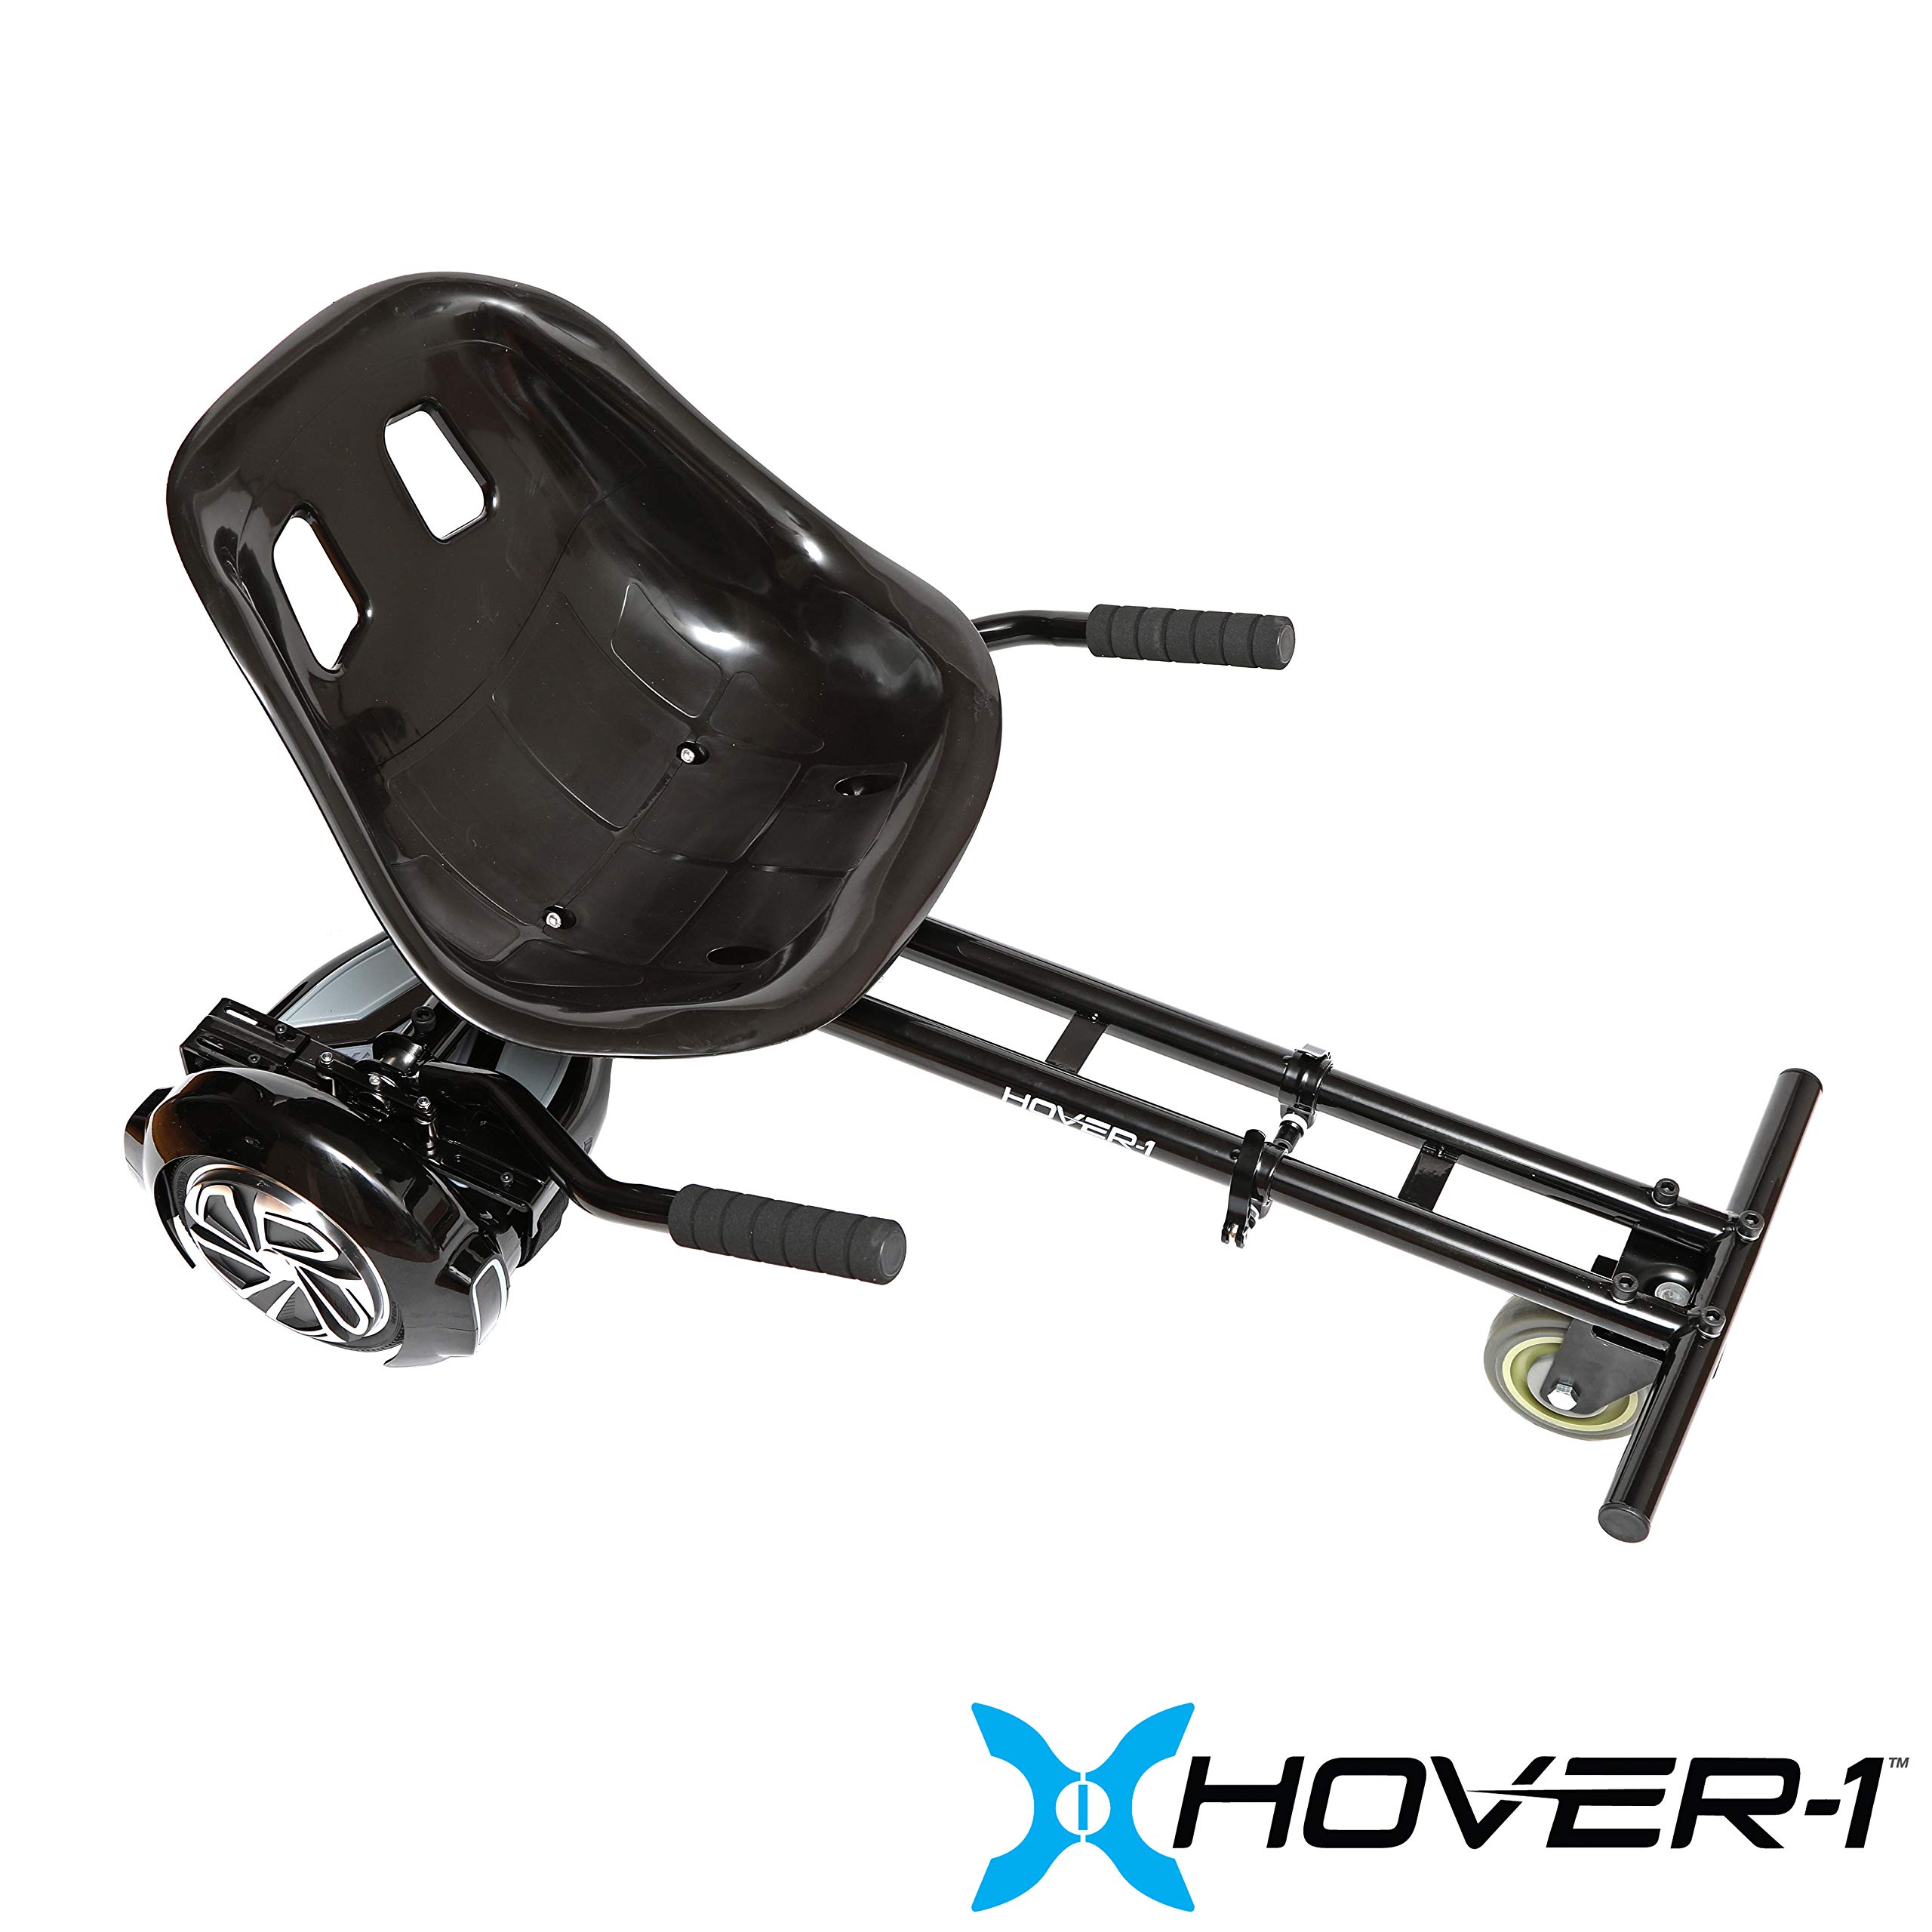 Hover-1 Buggy Attachment | Compatible with Most 6.5" & 8" Electric Hoverboards, Hand-Operated Rear Wheel Control, Adjustable Frame & Straps, Easy Assembly & Install $59 @ Amazon